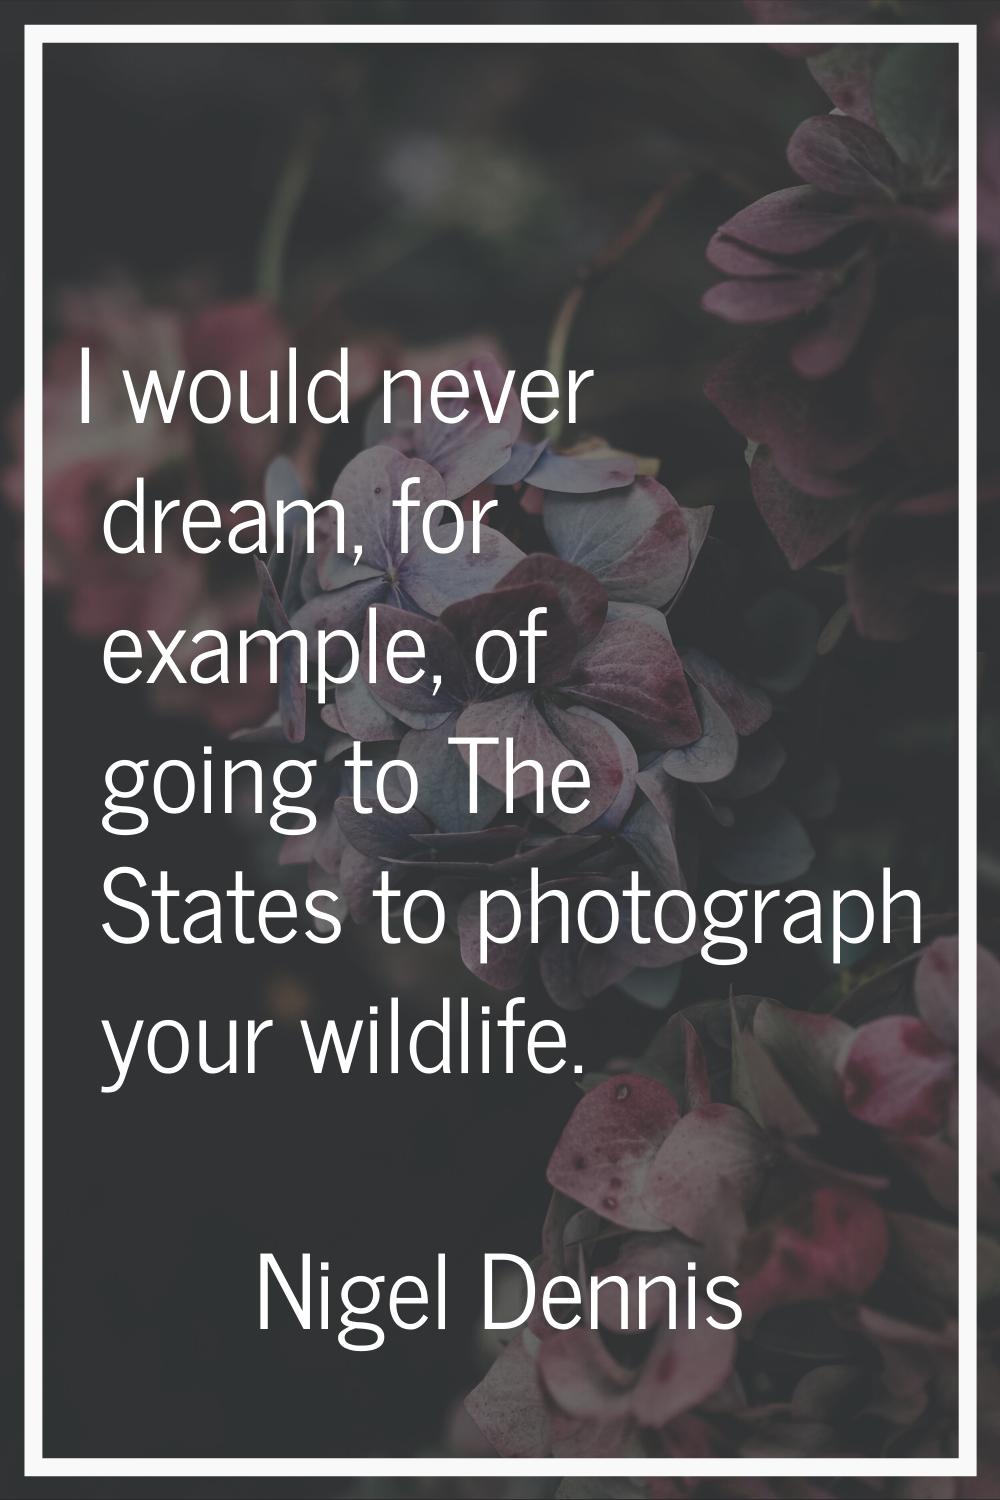 I would never dream, for example, of going to The States to photograph your wildlife.